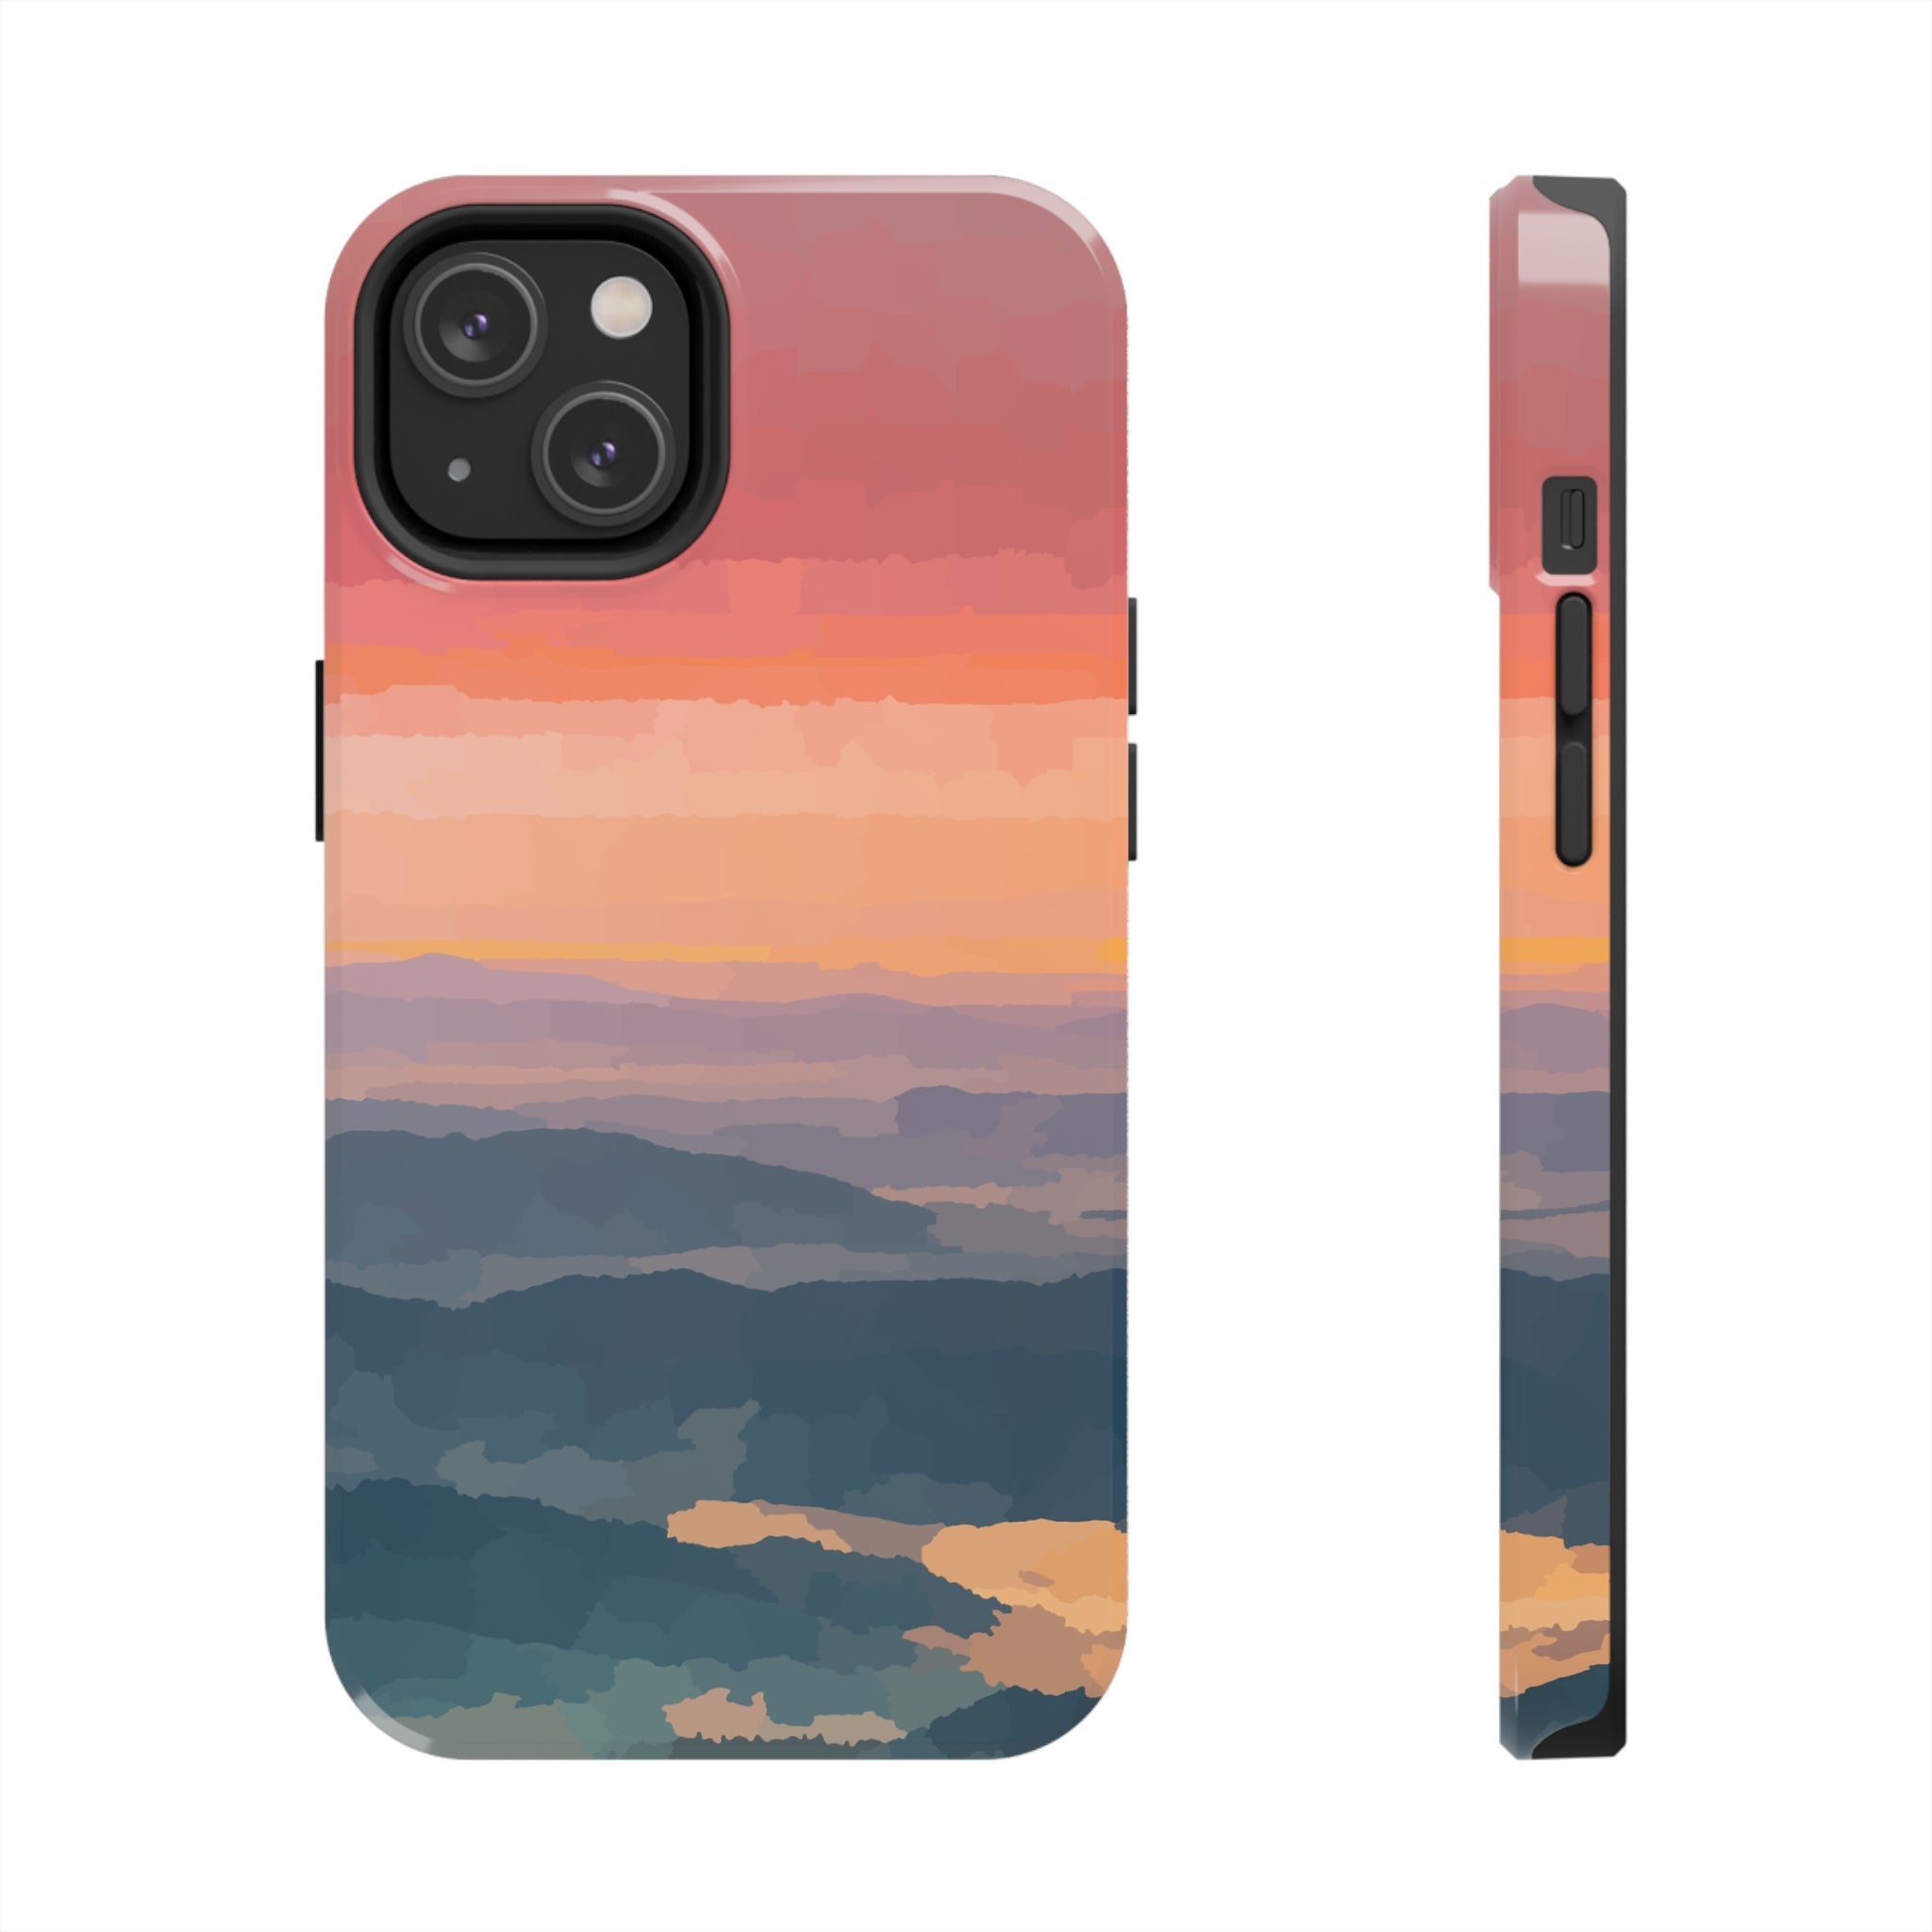 Main image of Pink Sunset Mountains iPhone Case